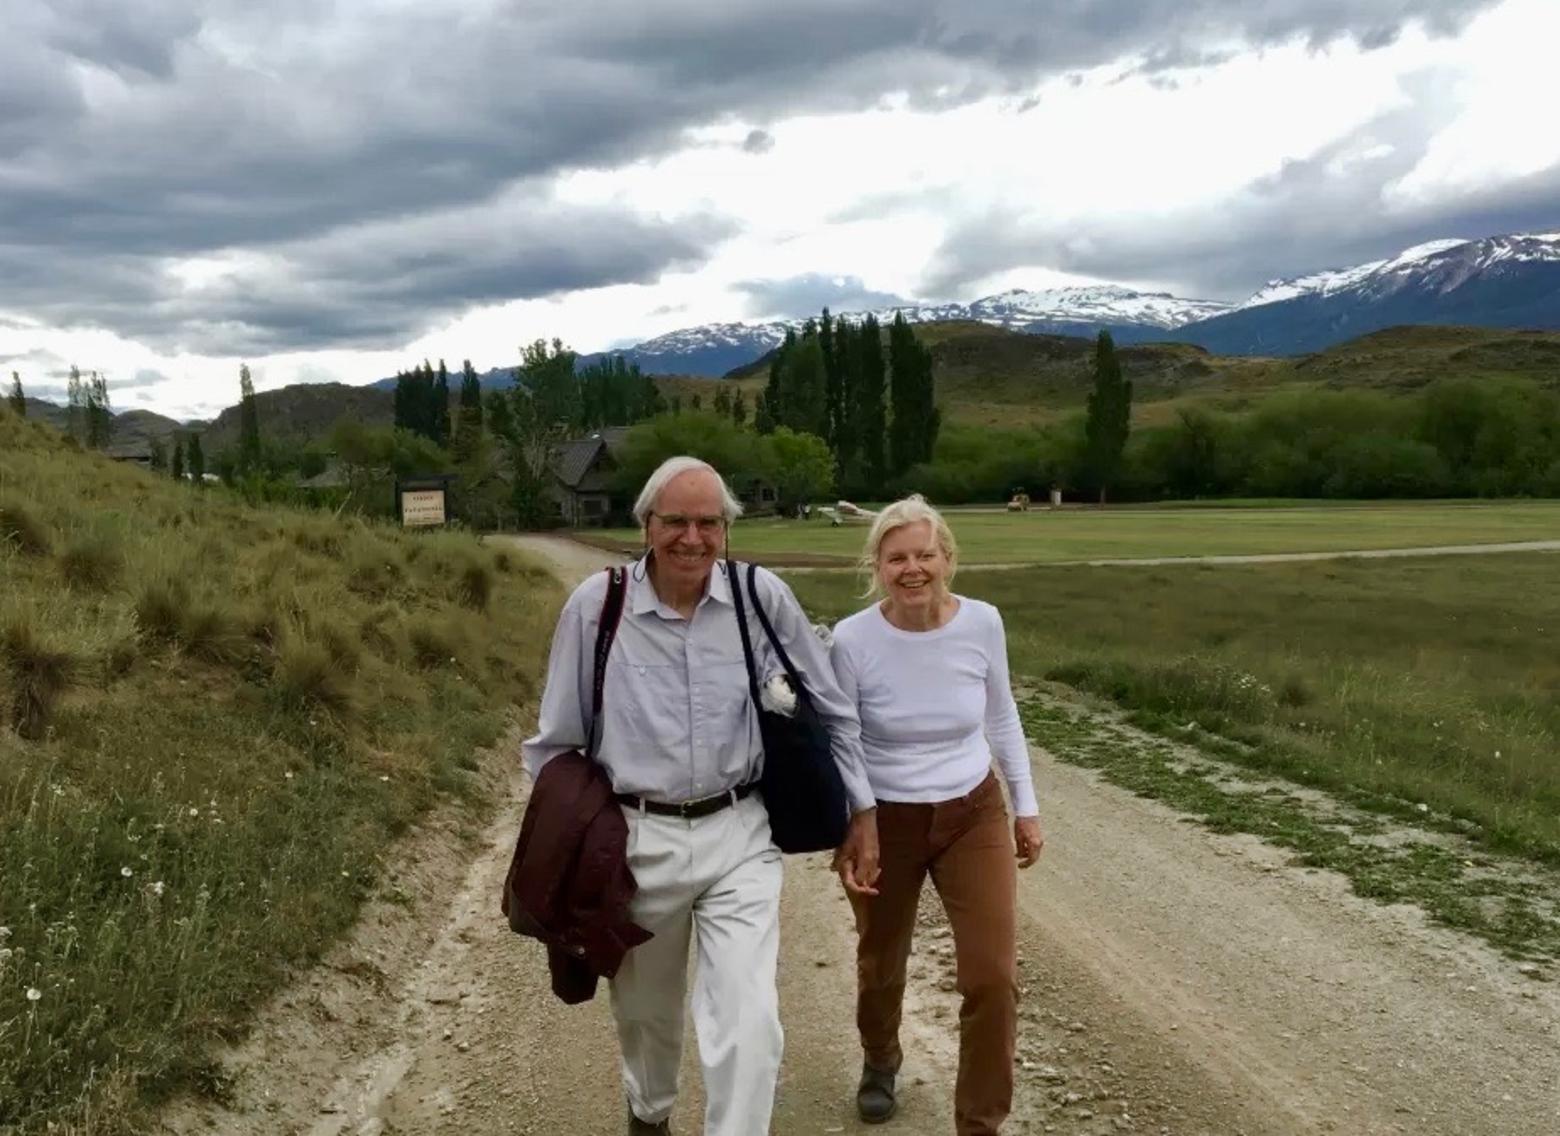 The late adventurer Doug Tompkins and his wife Kris McDivitt Tompkins, both successful business executives in the outdoor clothing industry who put their money where their hearts are and became pathfinding modern conservationists. Together, the Tompkinses purchased strategic lands in the Patagonia region of Chile and Argentina, important for biodiversity, and turned them into national parks and protected areas. While initially meeting resistance, citizens in those nations now recognize their value now and for generations to come. Photo courtesy George Wuerthner